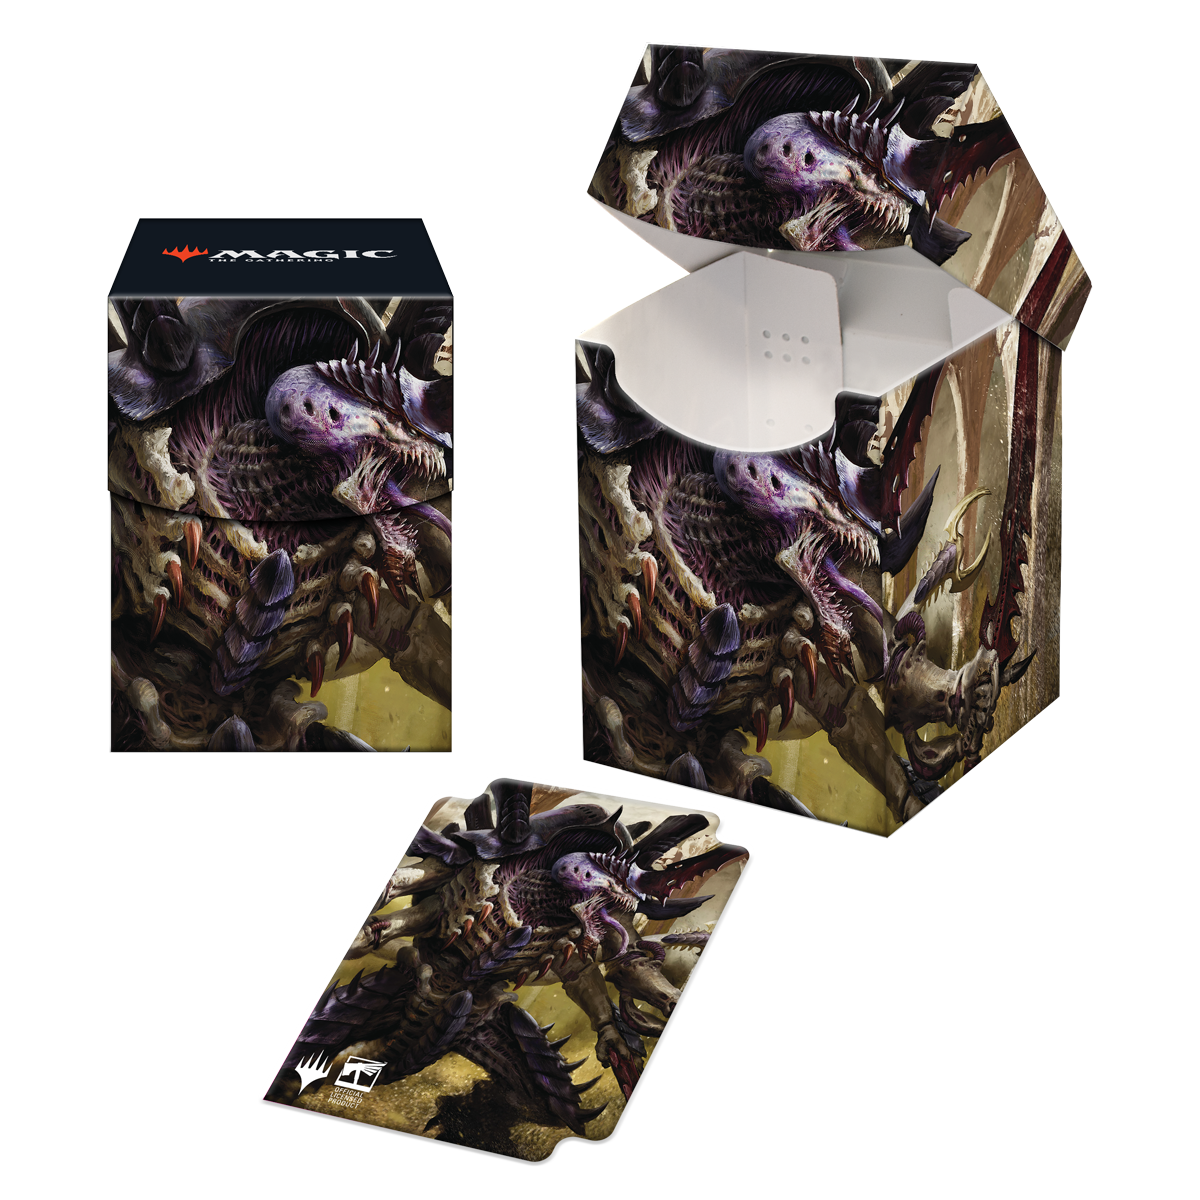 UP Warhammer 40K Commander The Swarmlord Deck Box 100+